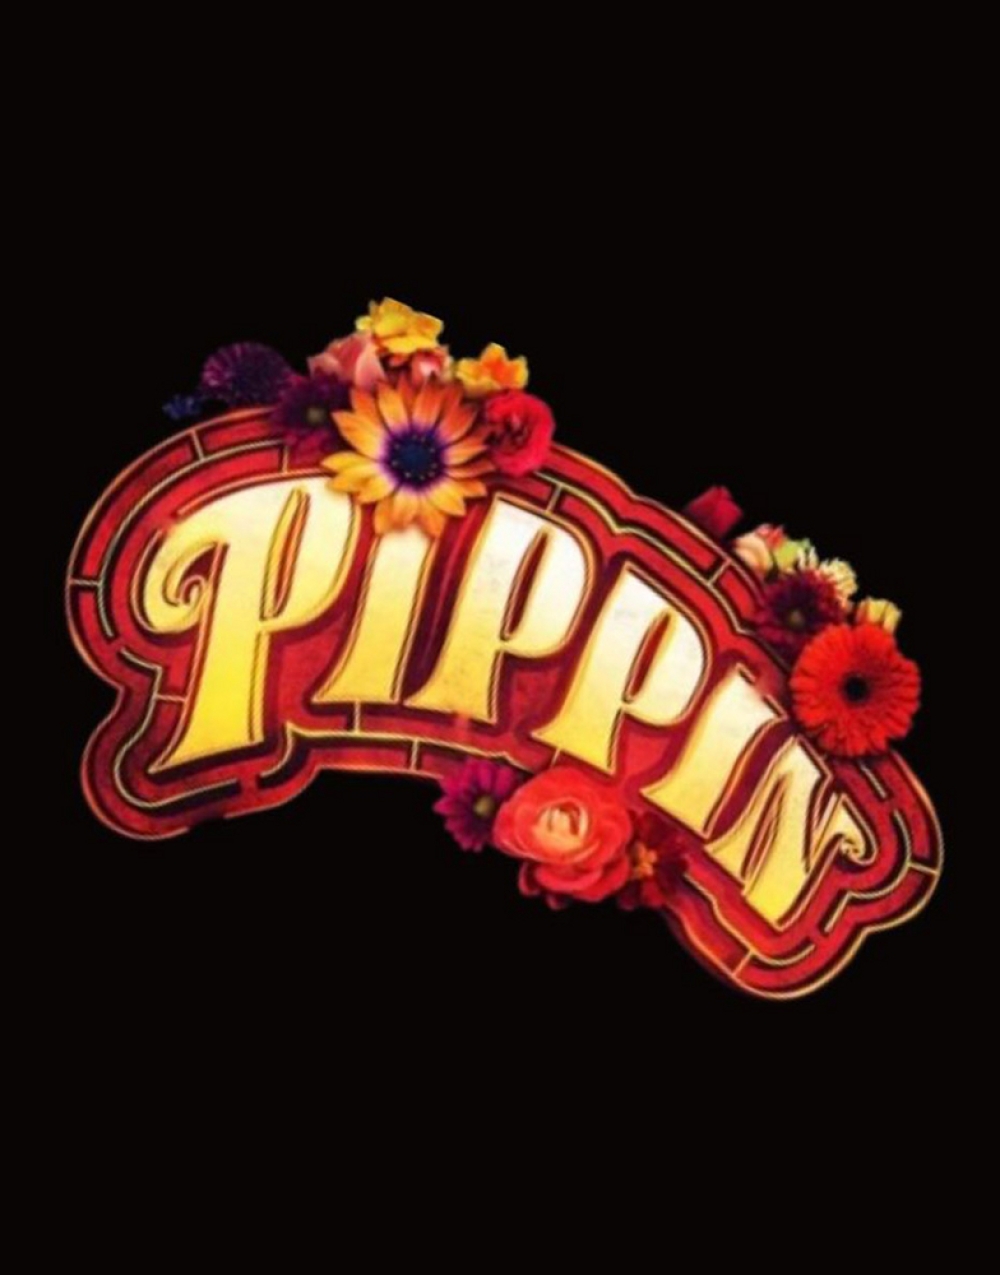 Pippin - Pembroke Pines Theatre of the Performing Arts Stage Mag